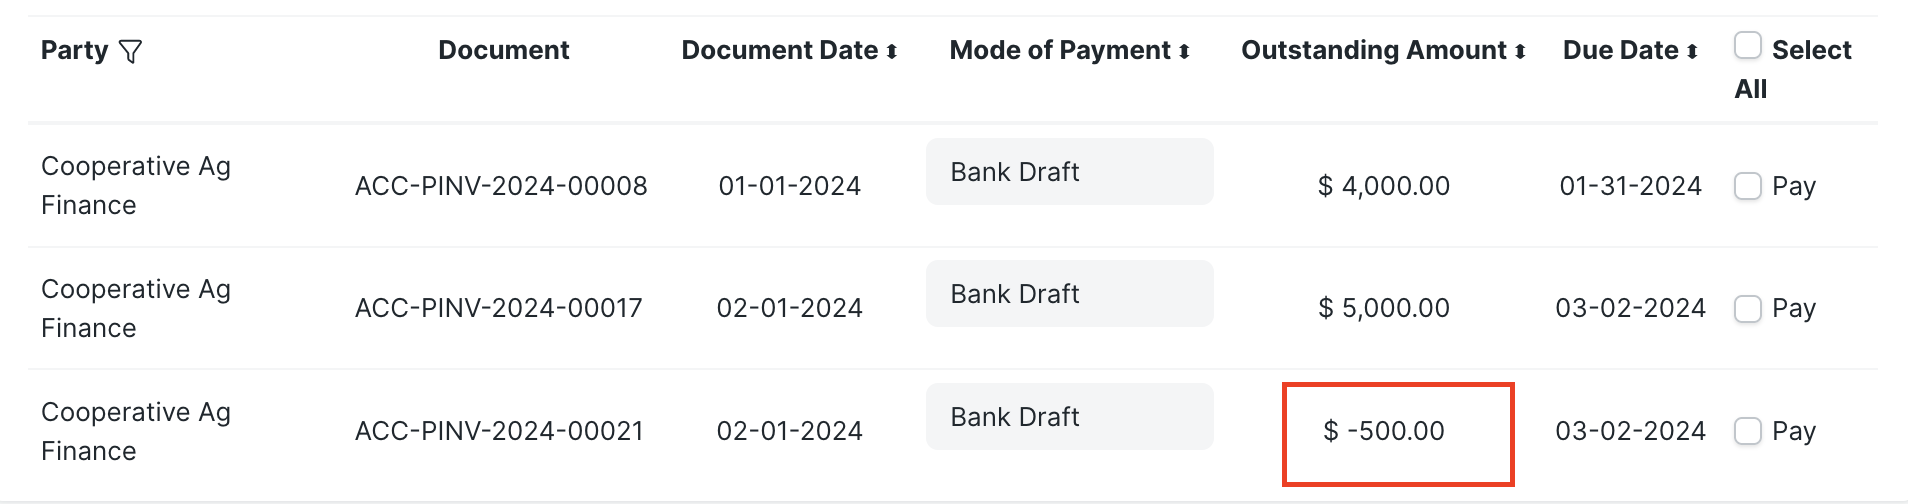 Screen shot showing three transactions for a party in a Check Run, where one of the transactions is a return for $500. This row may be selected to "pay" and offset other row amounts as long as the total amount to pay the given party is greater than zero.